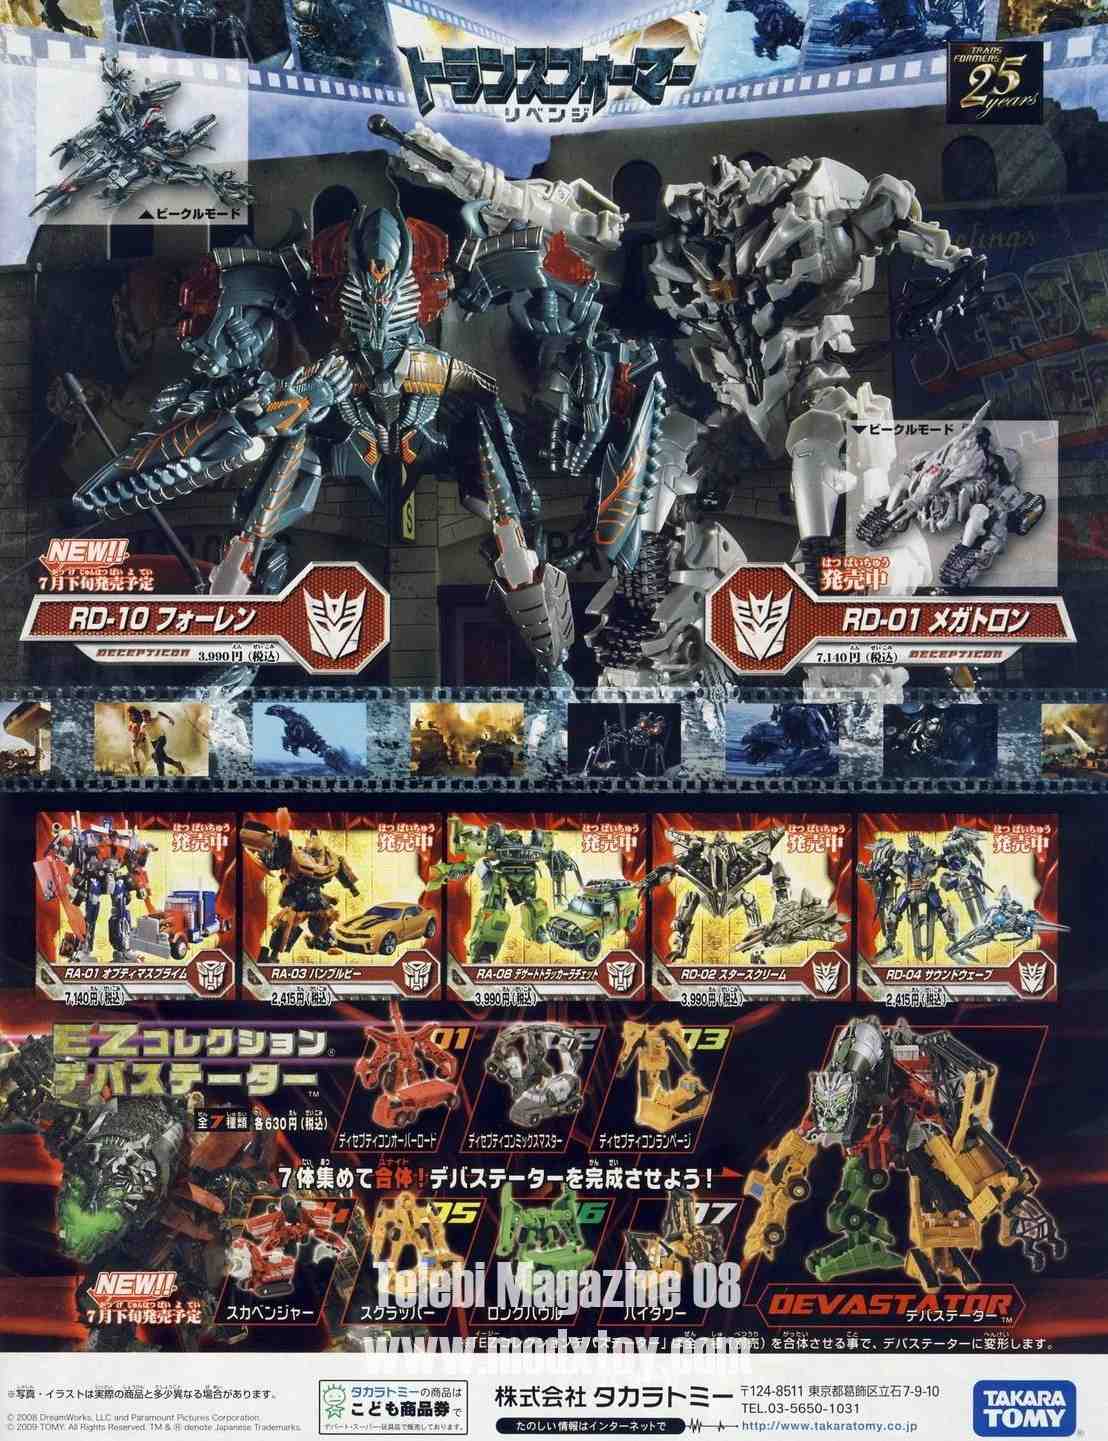 Re: Scanned images for Jap Toy Magazine 09 - ROTF Toys